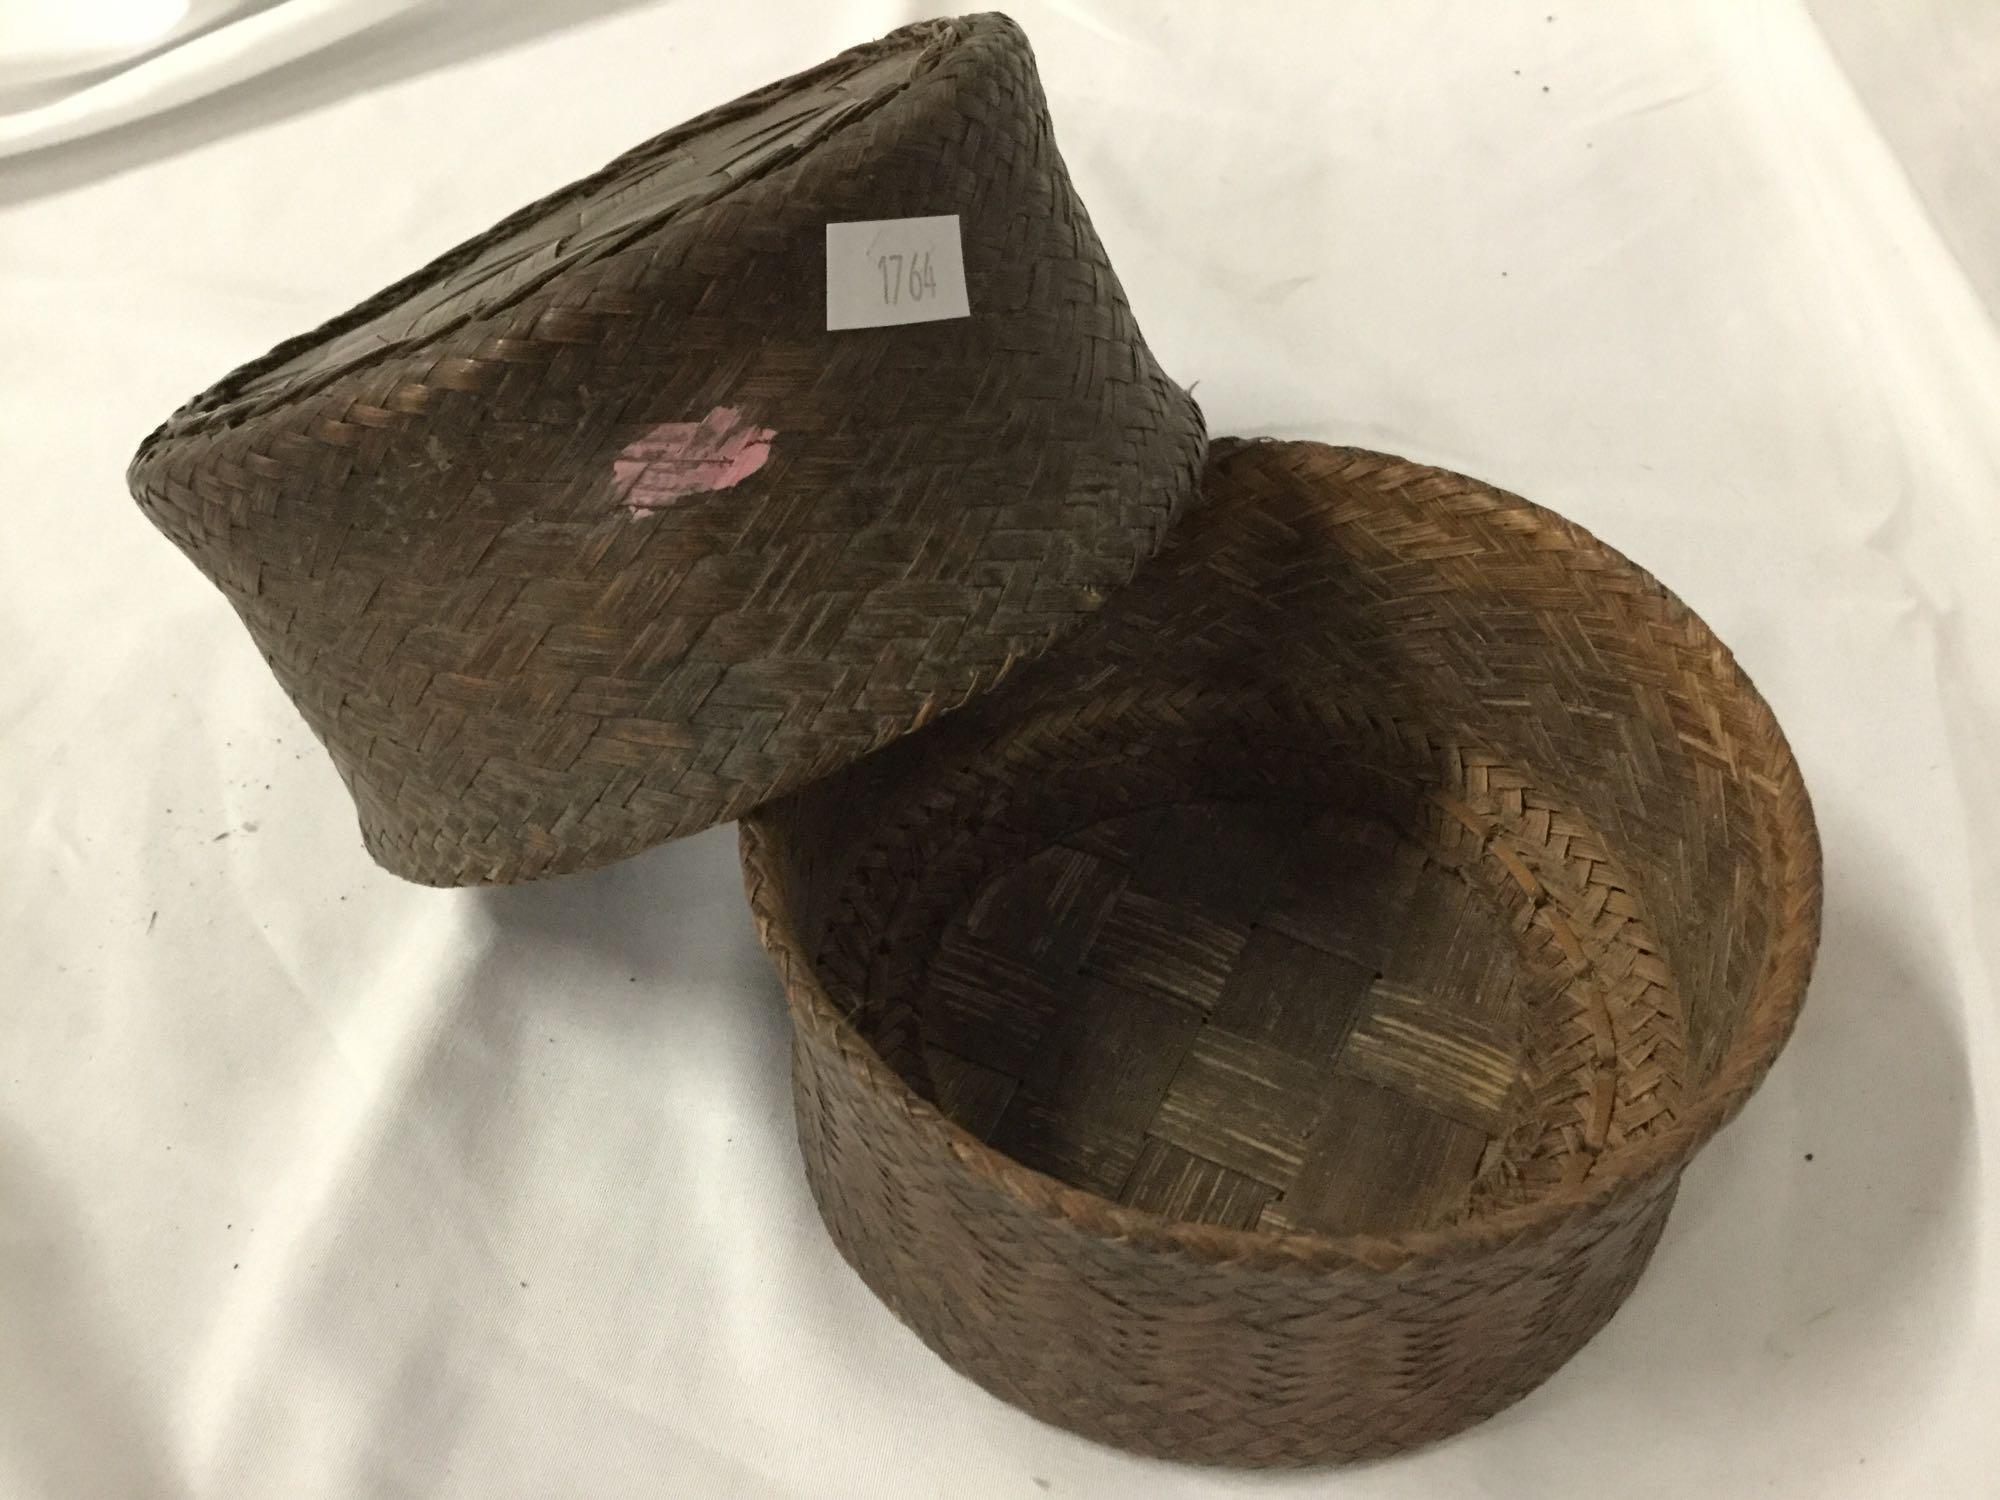 Set of 2 small antique woven baskets with lids, made in Bhutan